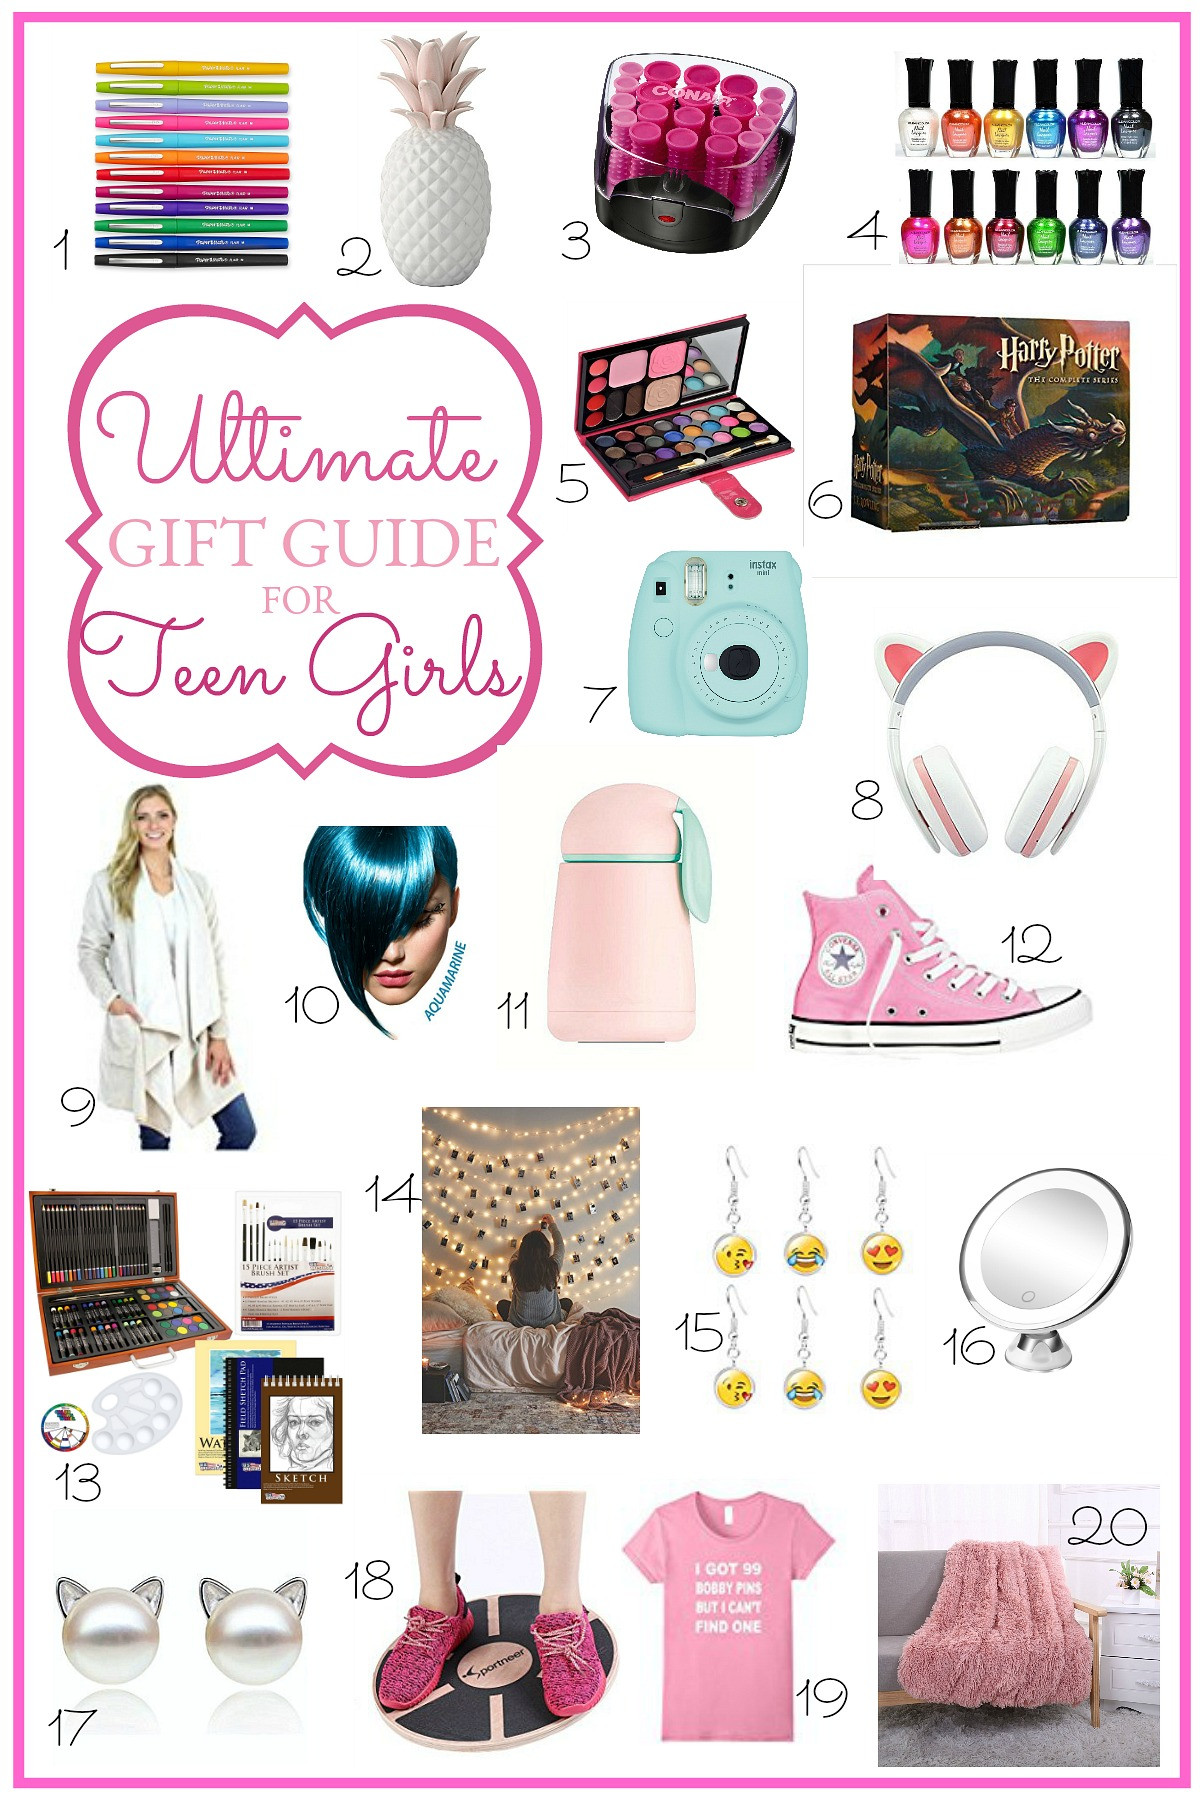 Top Gift Ideas For Teen Girls
 Ultimate Holiday Gift Guide for Teen Girls